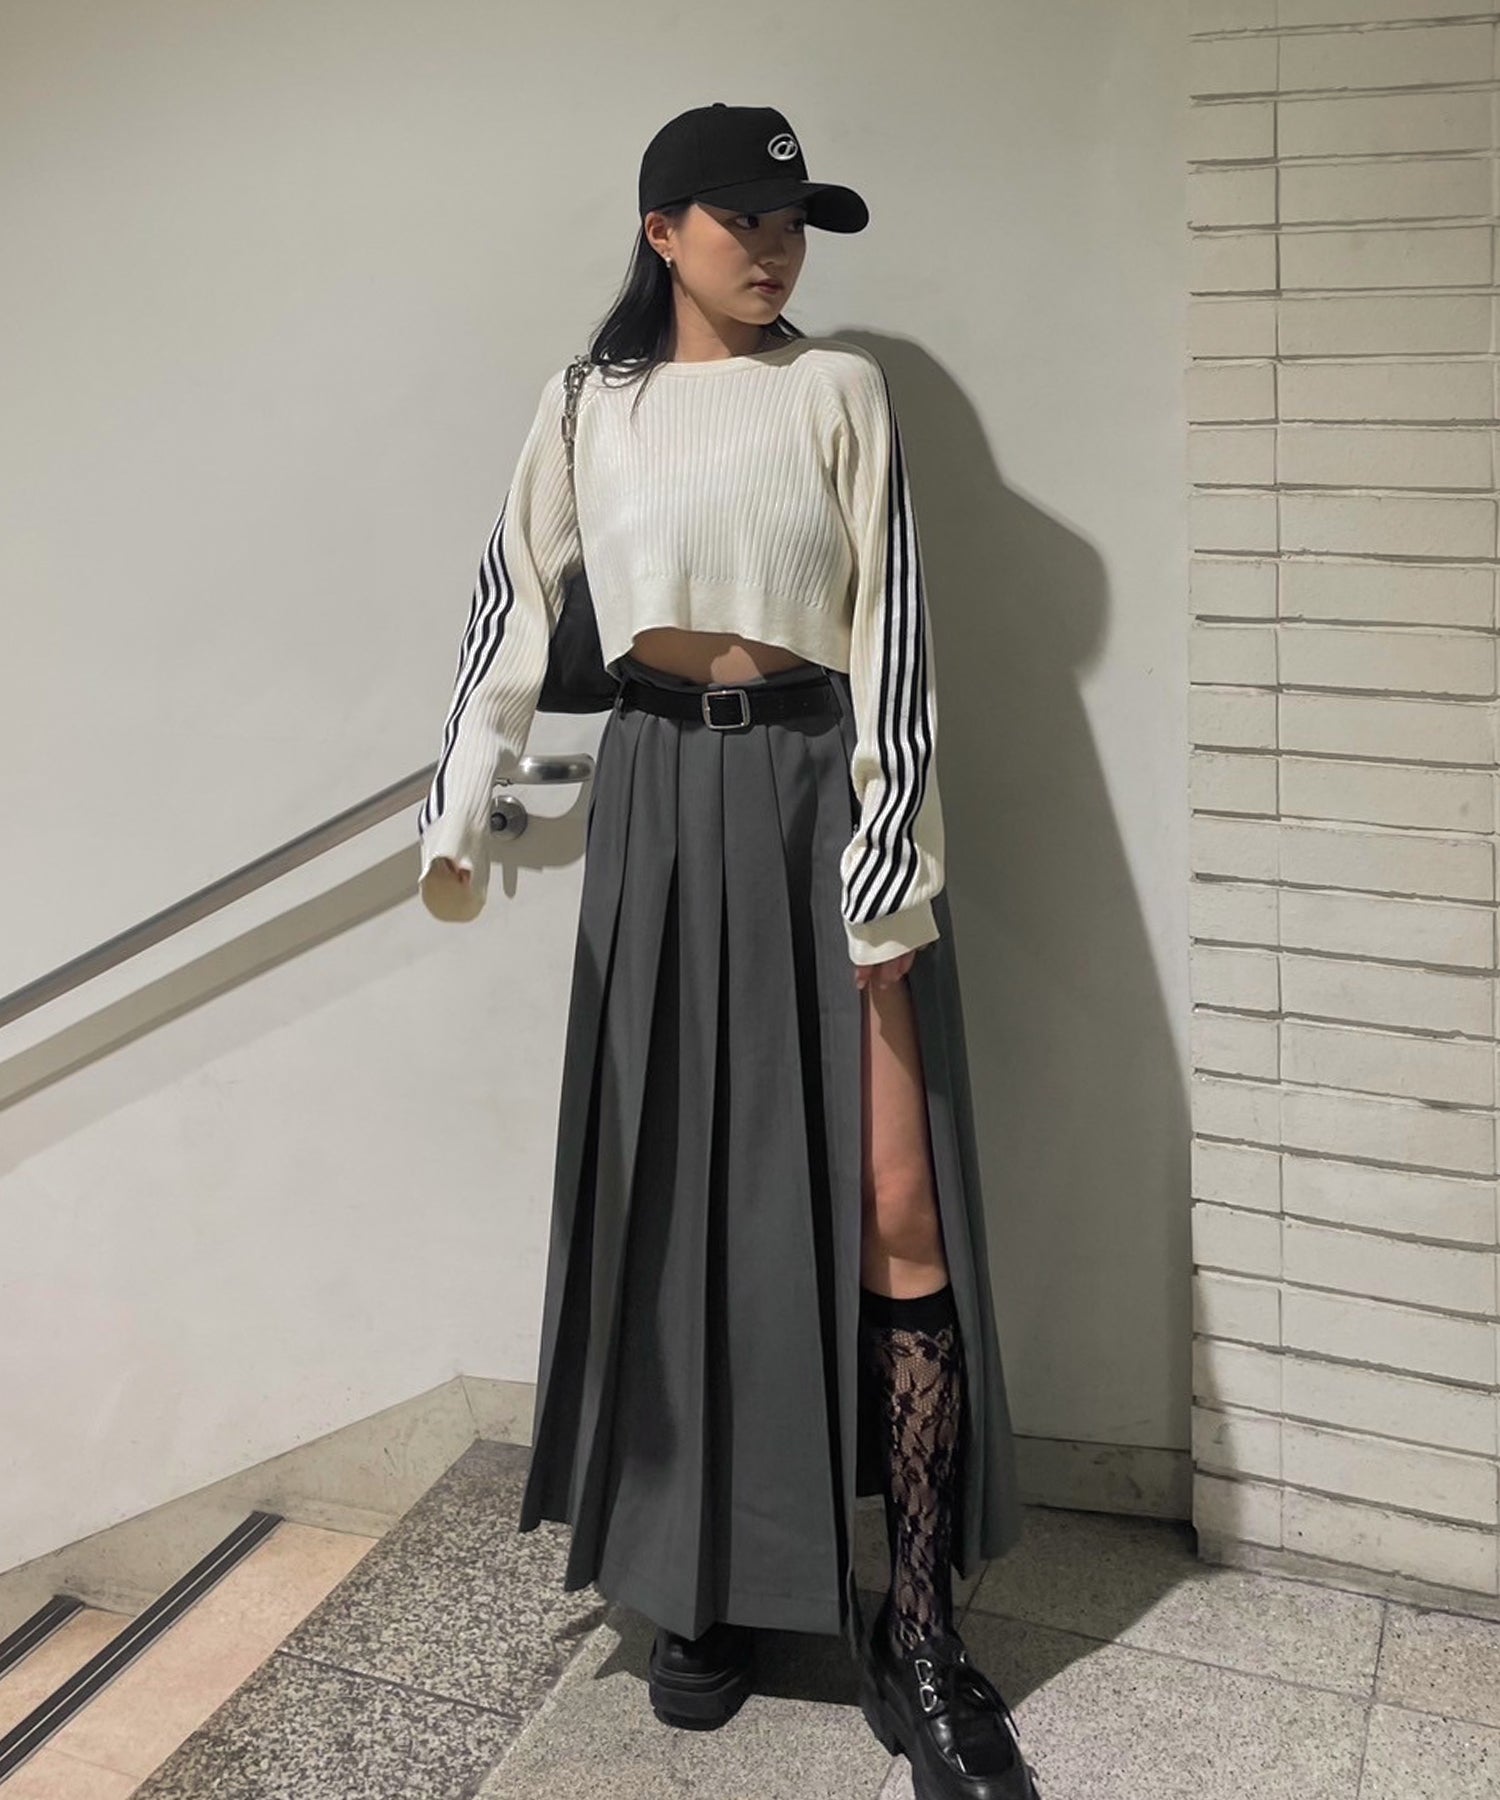 aclent pleats wrap long skirt　グレー大丈夫です変更しますね